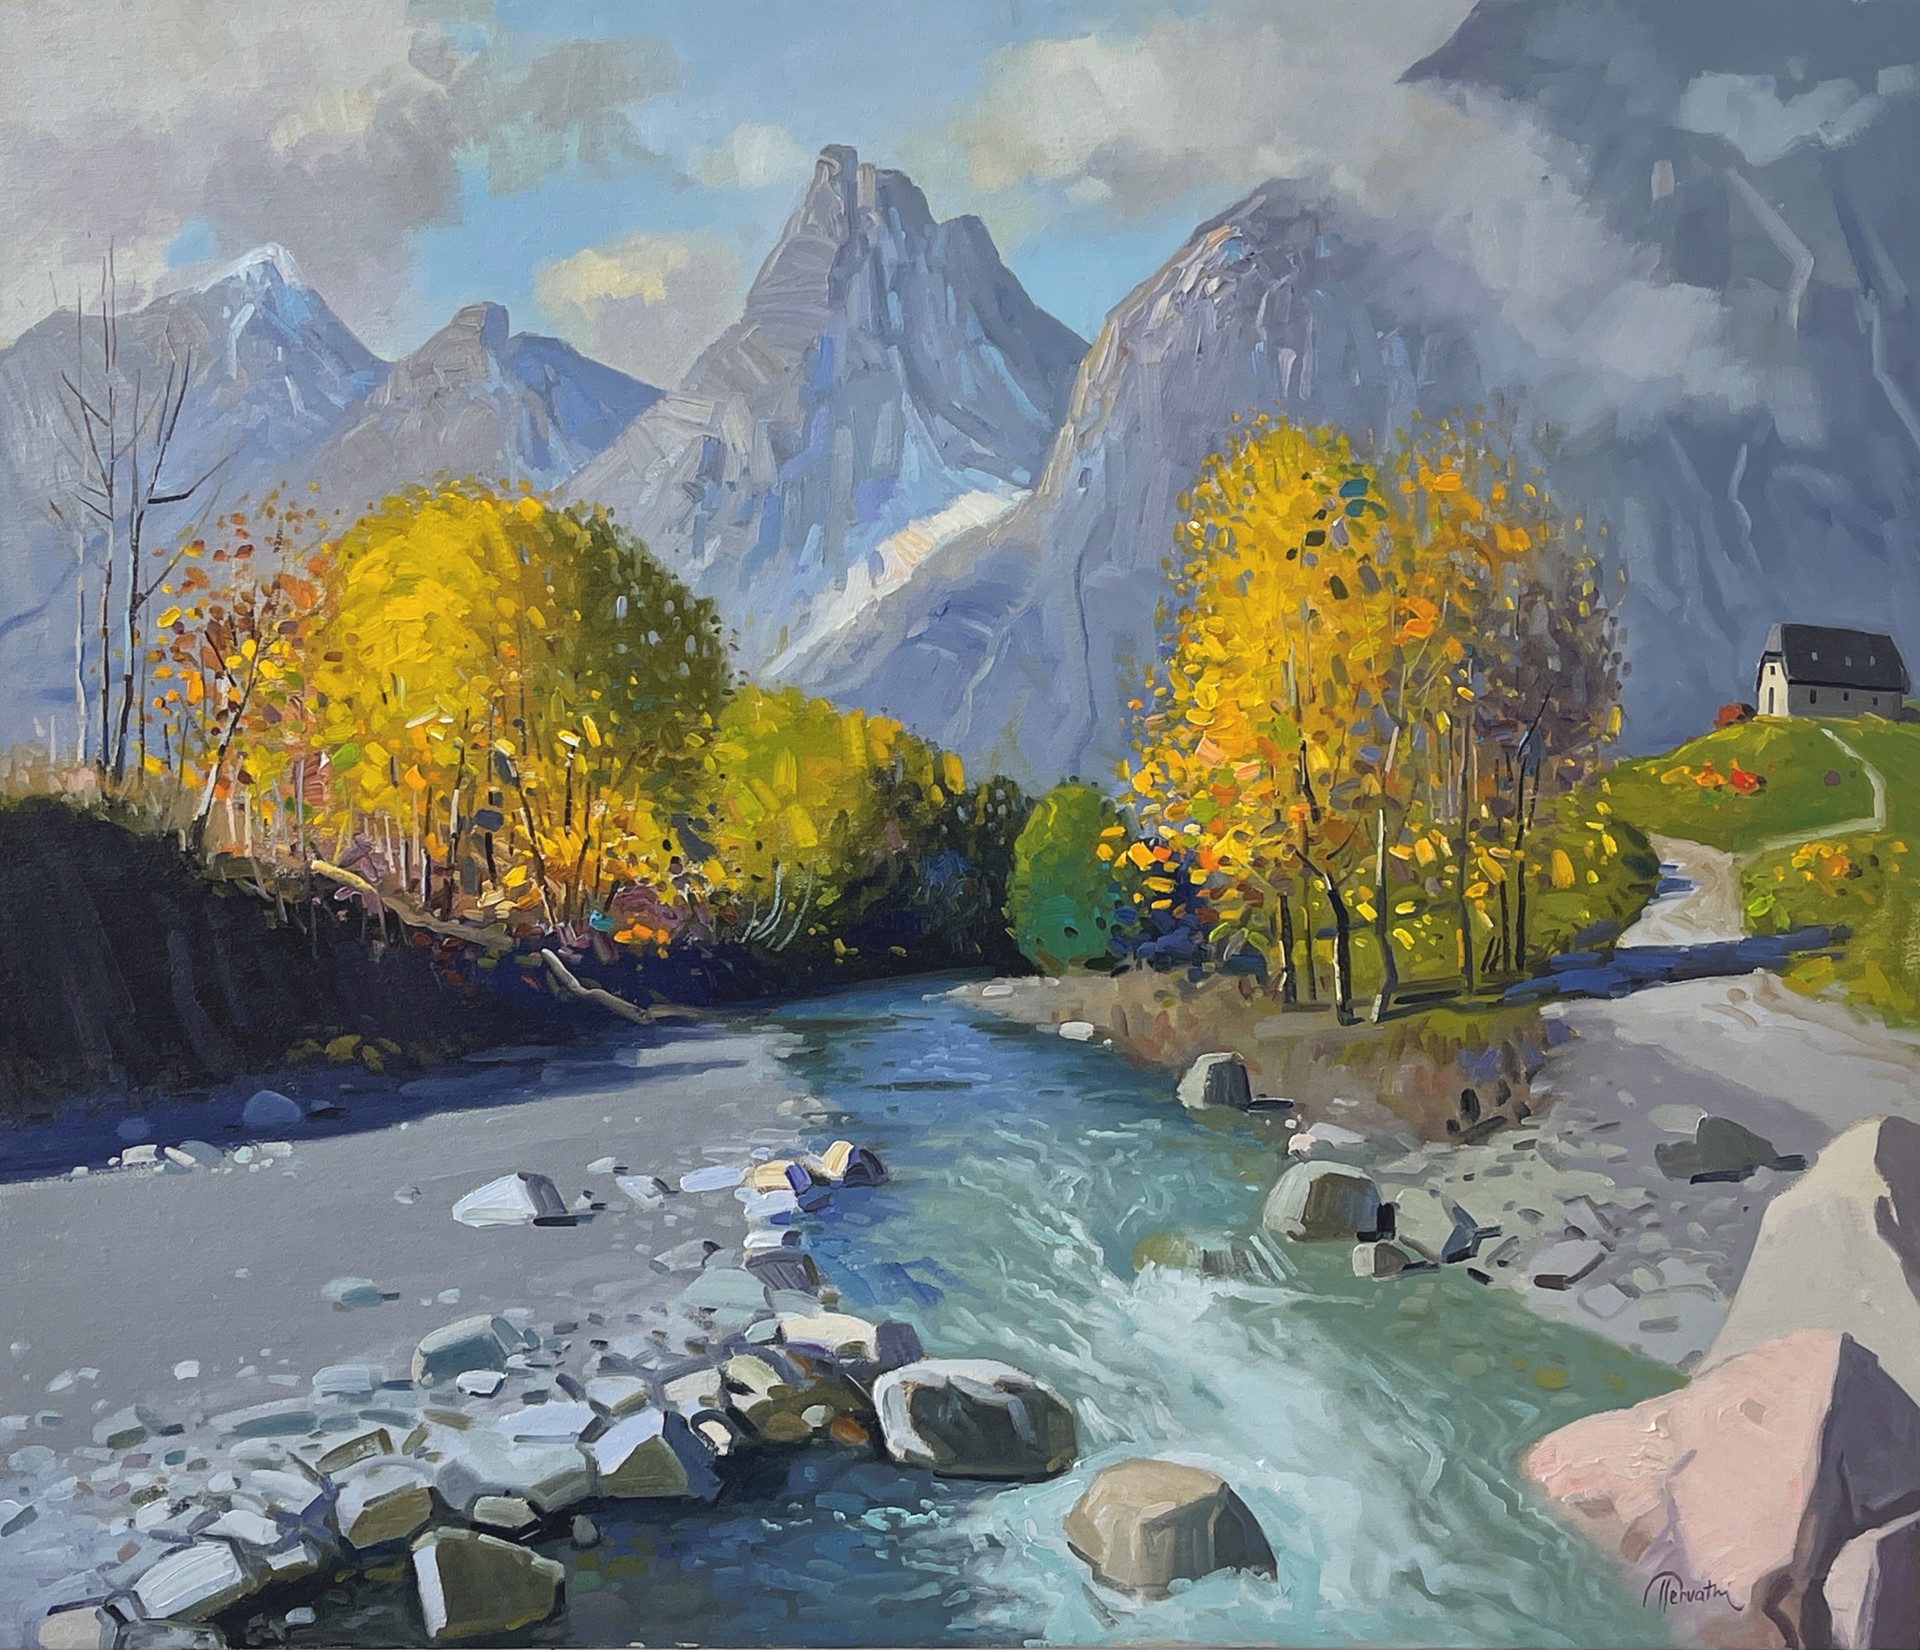 The Stream in the Fall by PASHK PERVATHI